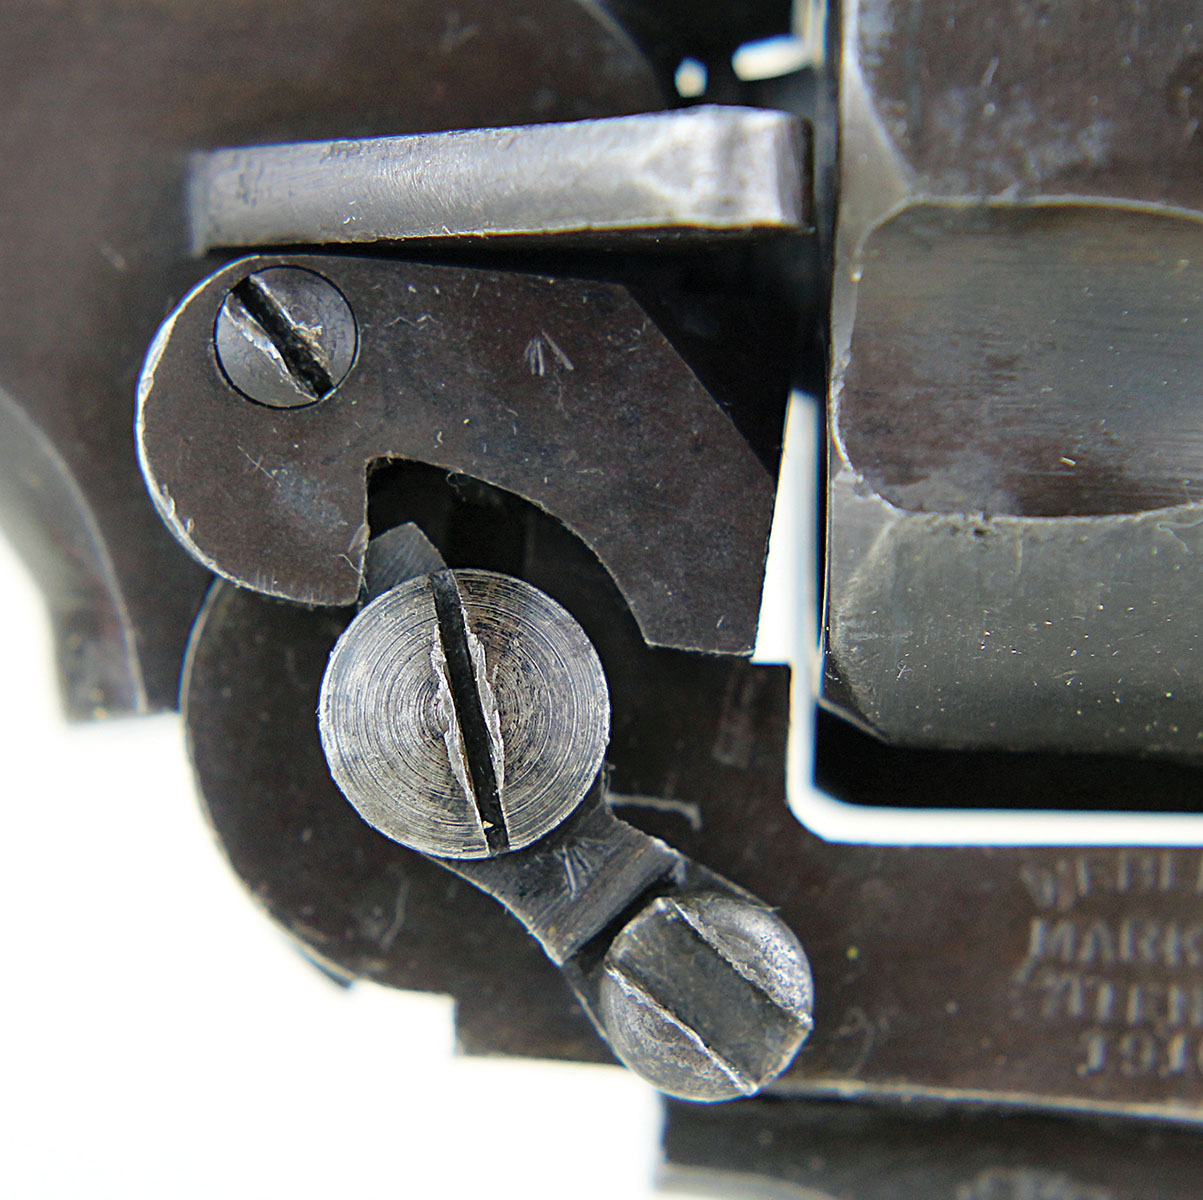 External parts and screws barnacle the Webley. These three screws are associated with pivoting the top-break barrel and operating the automatic ejector.